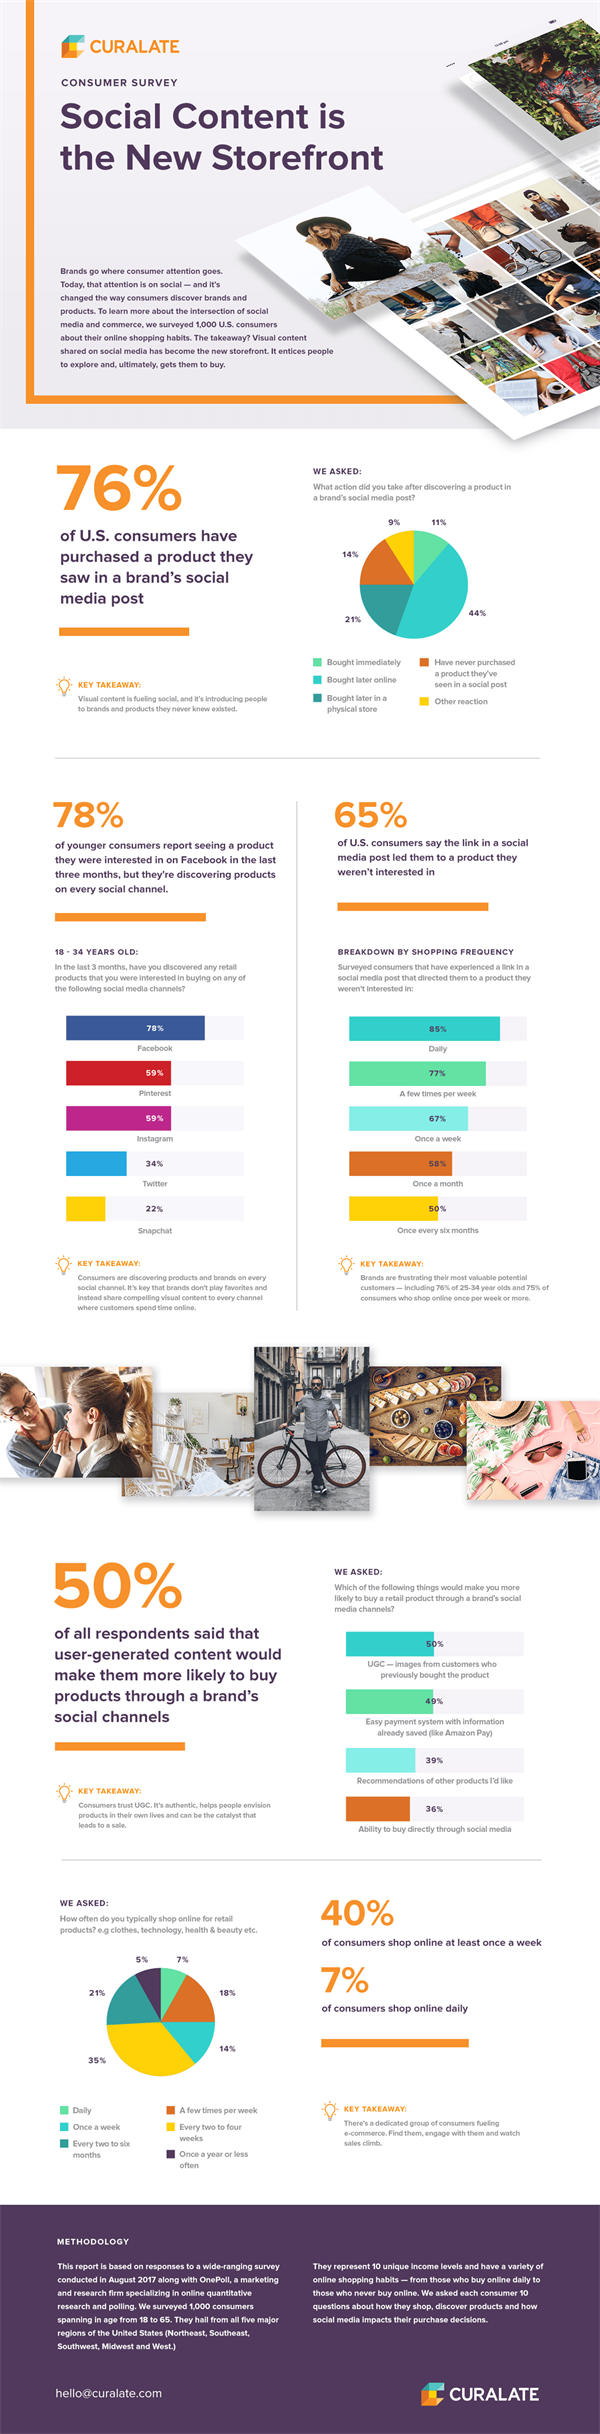 Curalate_ConsumerSurvey_Infographic